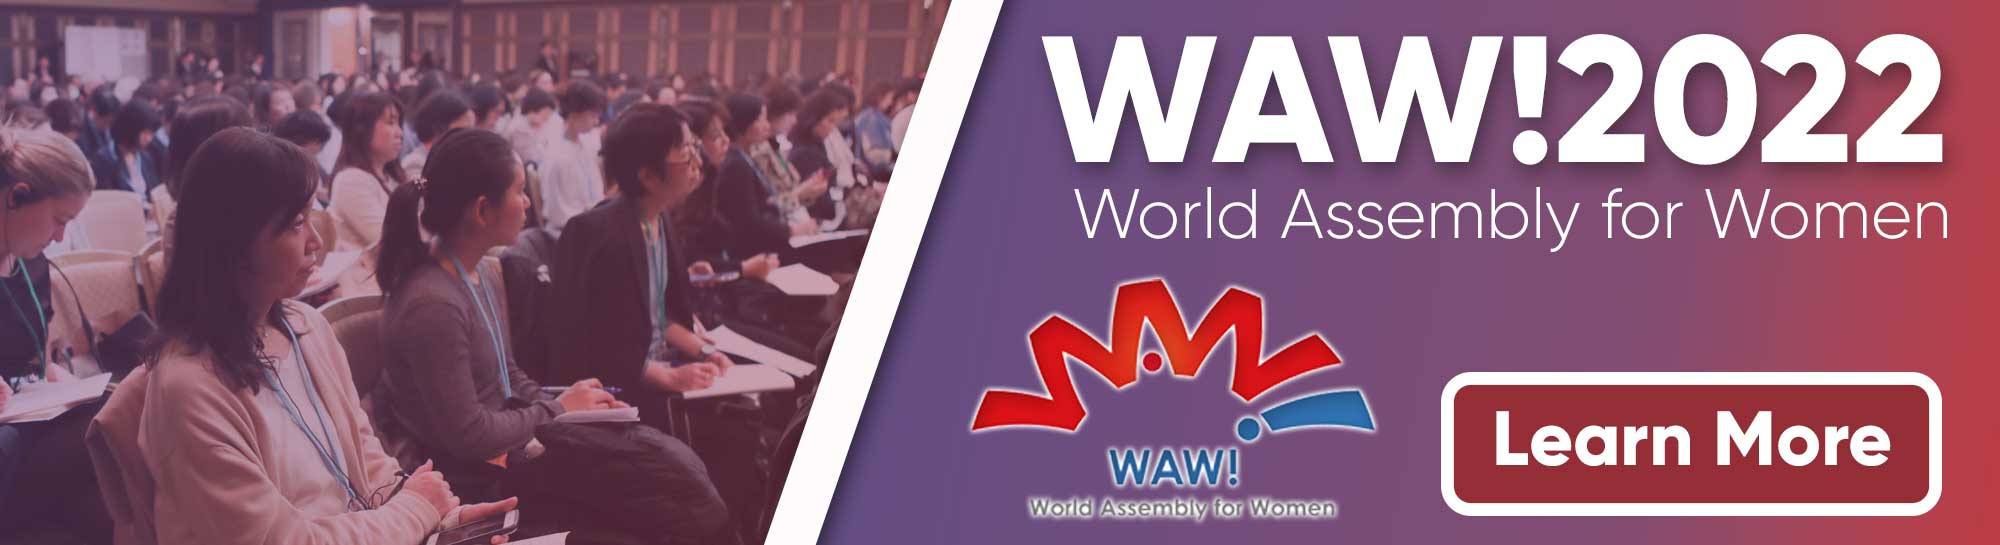 WAW!2022: Japan Stages World Assembly for Women After Three-Year Hiatus